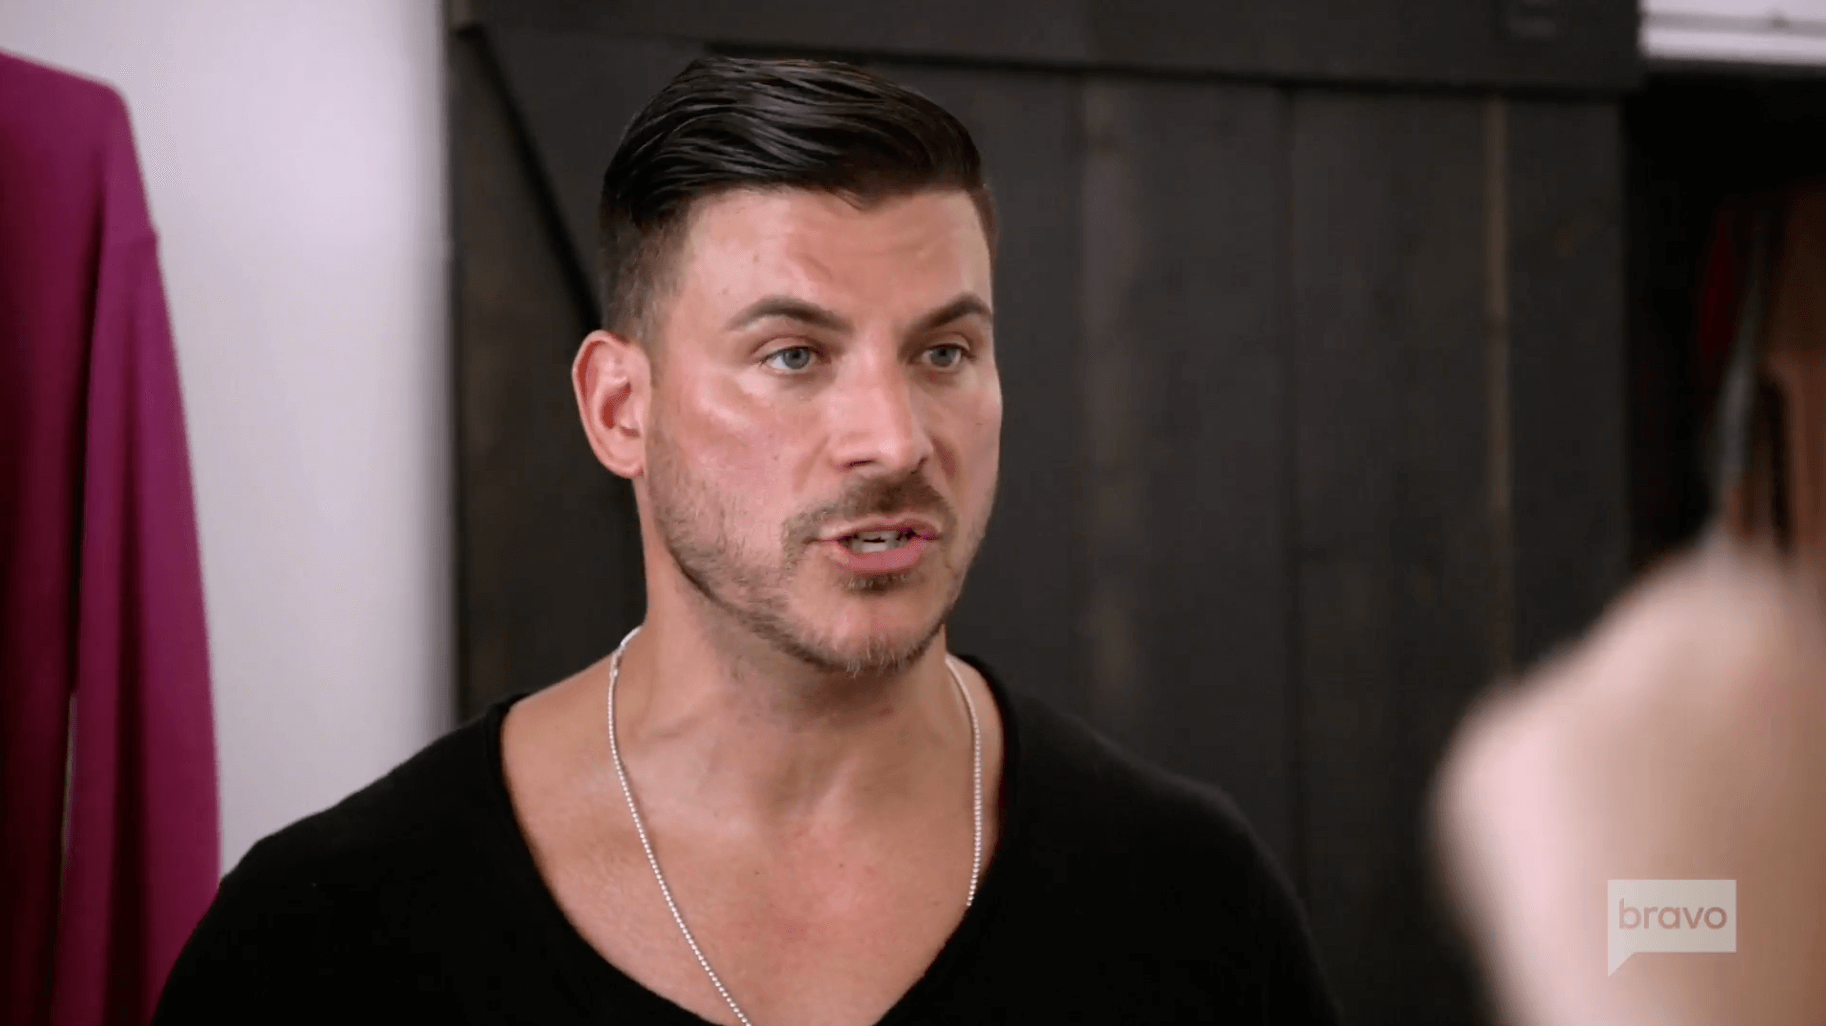 Jax Taylor Causes Inflight Emergency On JetBlue Flight from JFK to LAX,  Plane Returned to Gate